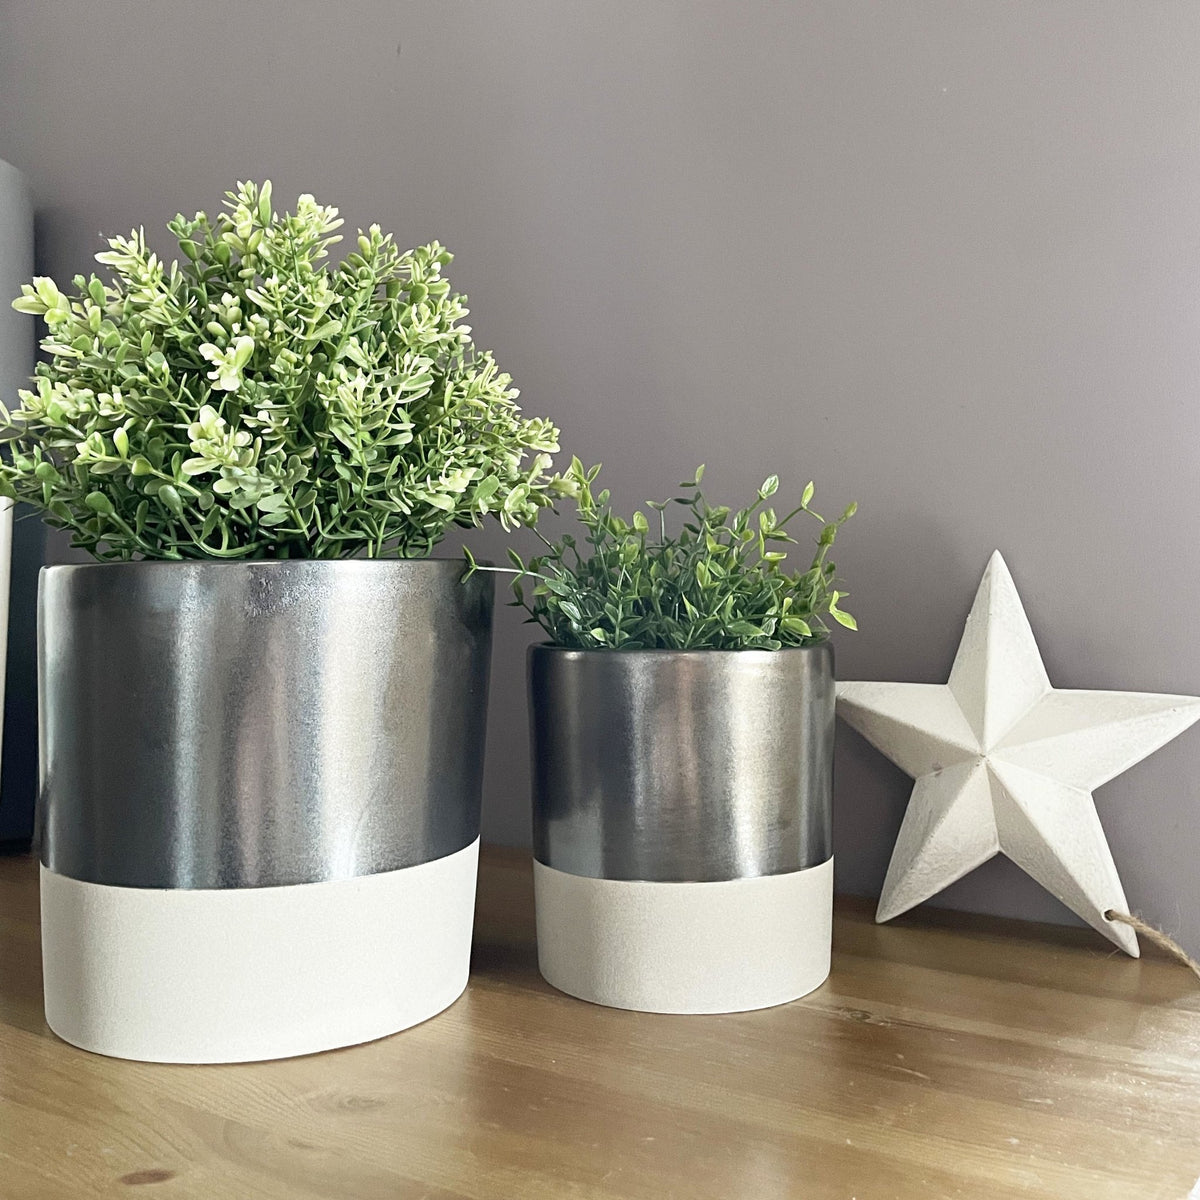 Terra Grey Metallic Style Planters with greenery on table with white star decor